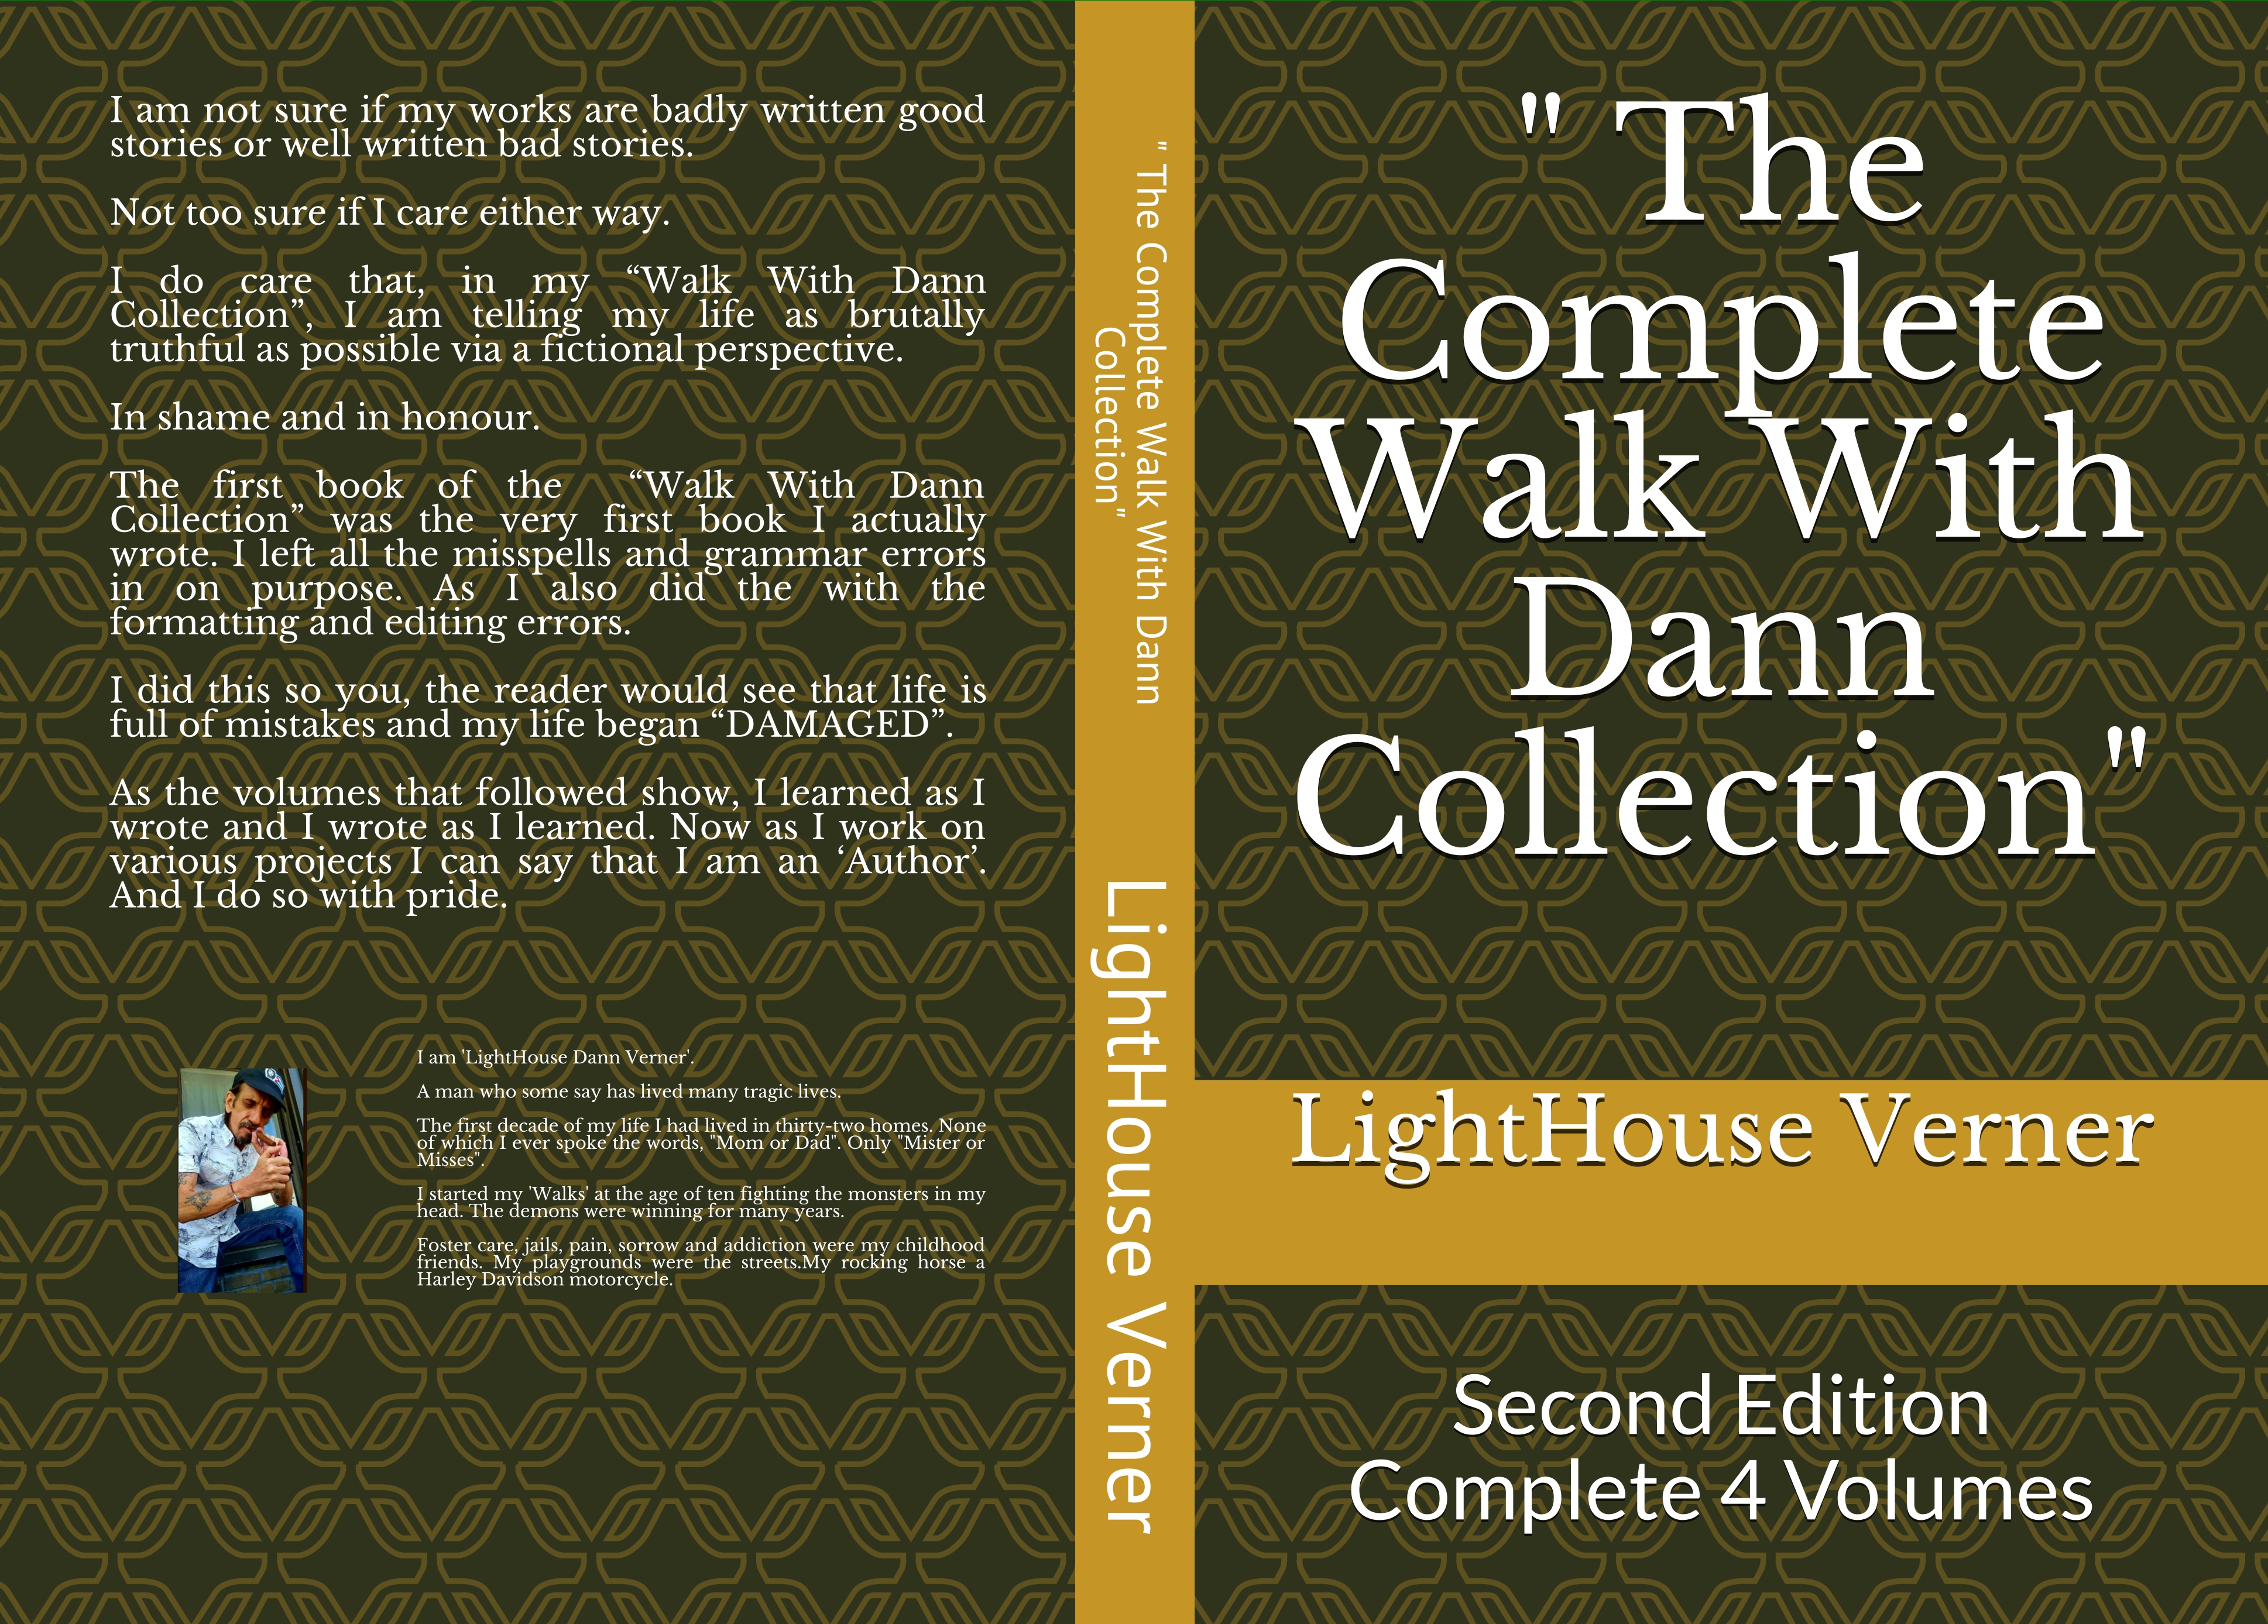 The Complete Walk With Dann Collection - 2nd Edition